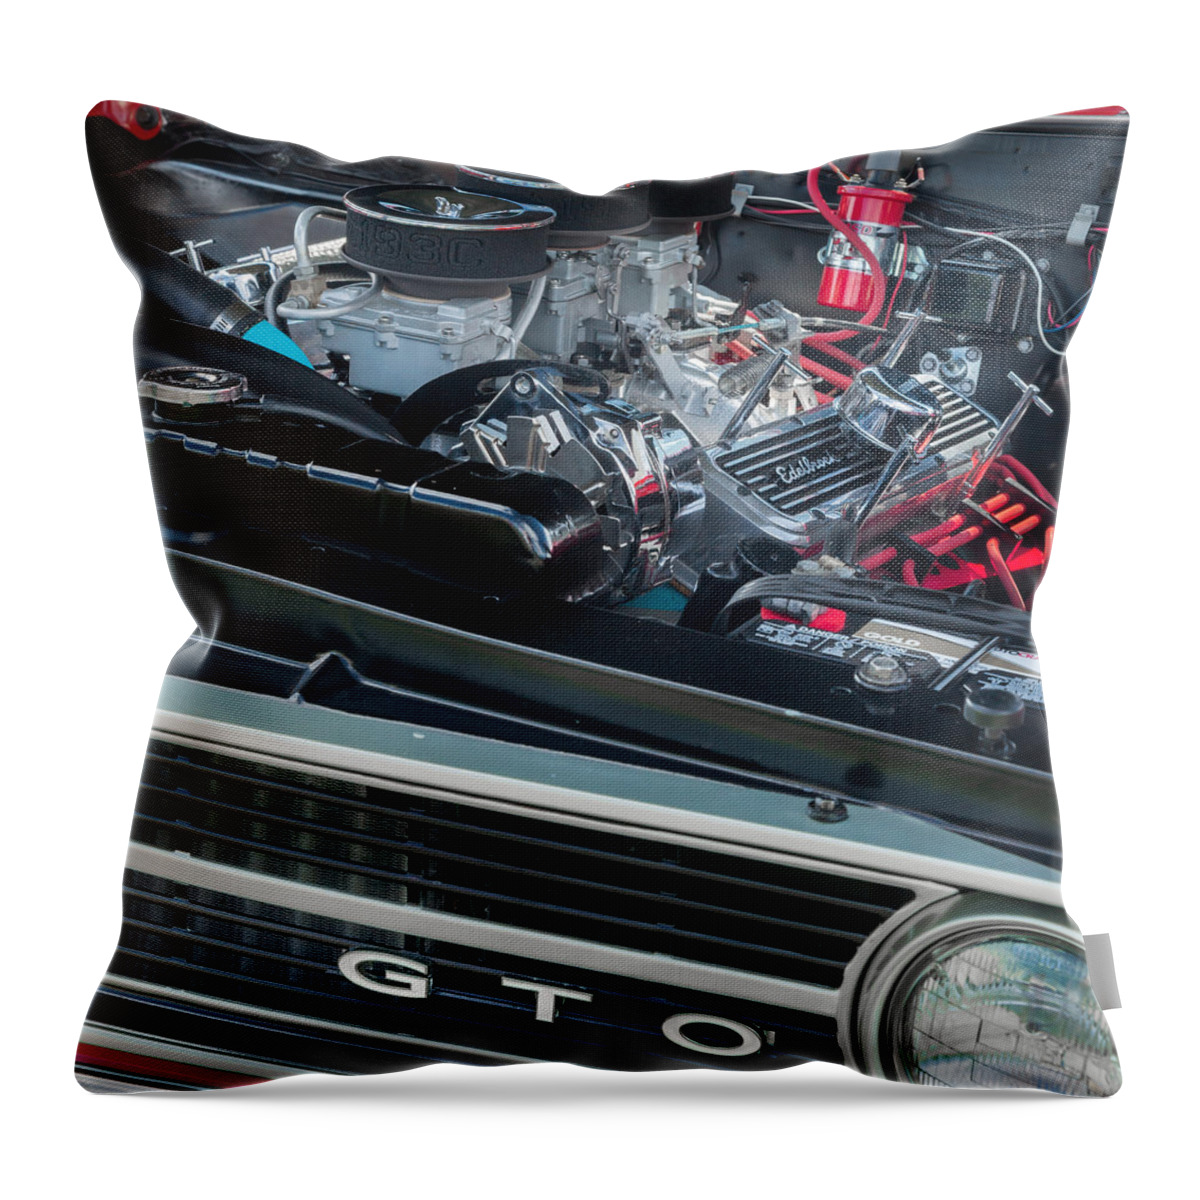 Gto Throw Pillow featuring the photograph Pontiac G T O by Bill Wakeley